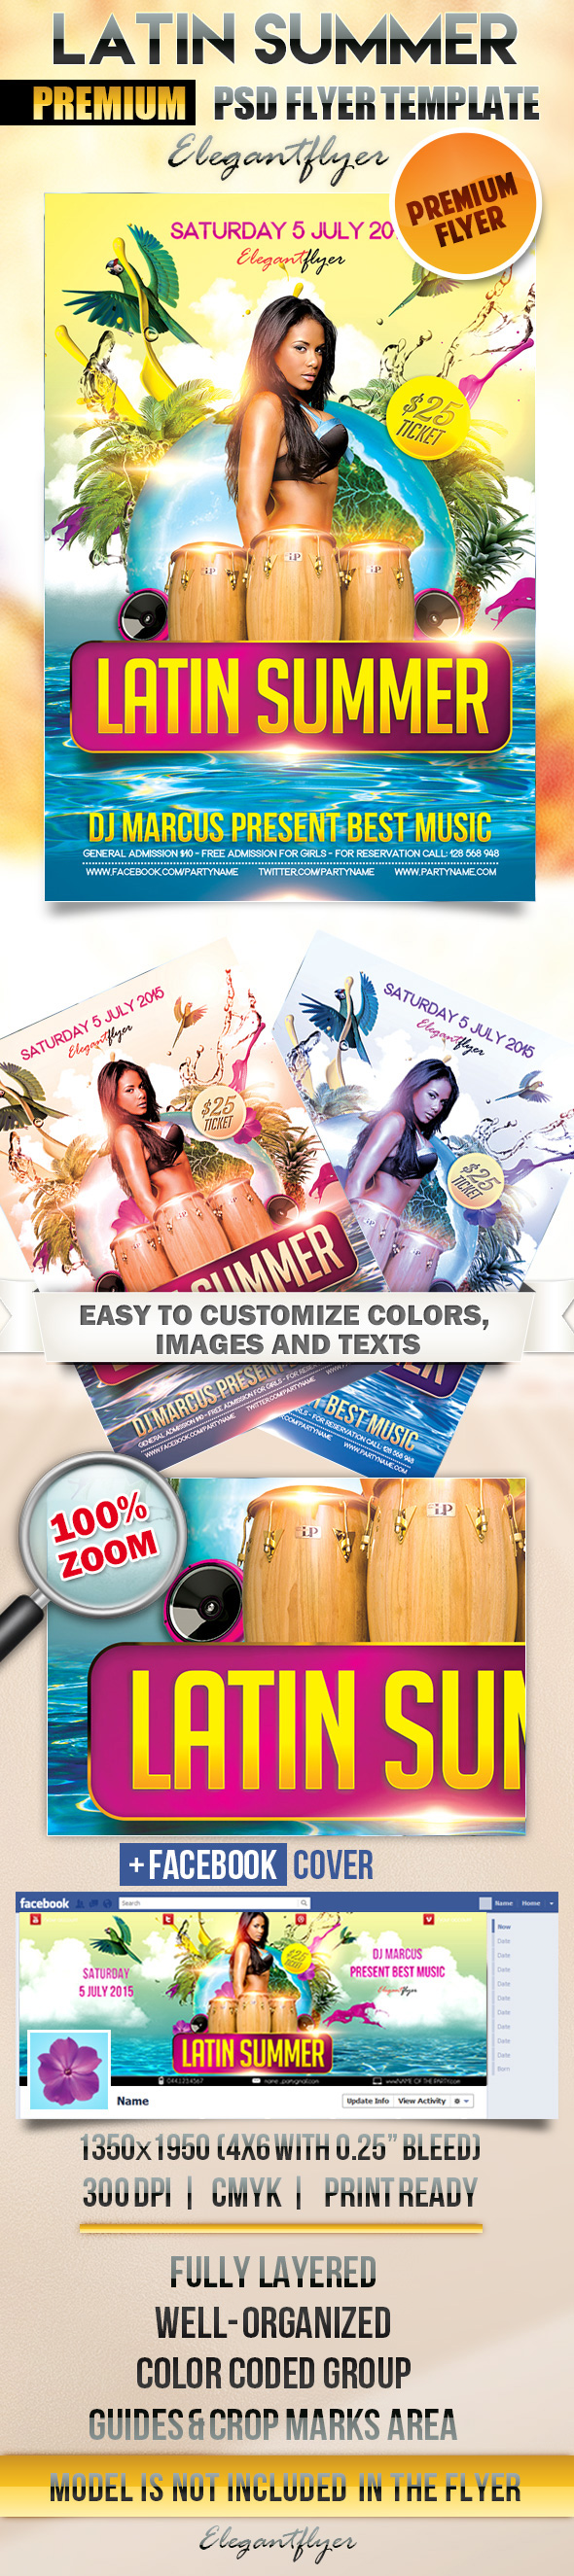 Facebook Cover Dance Summer Party Flyer Template